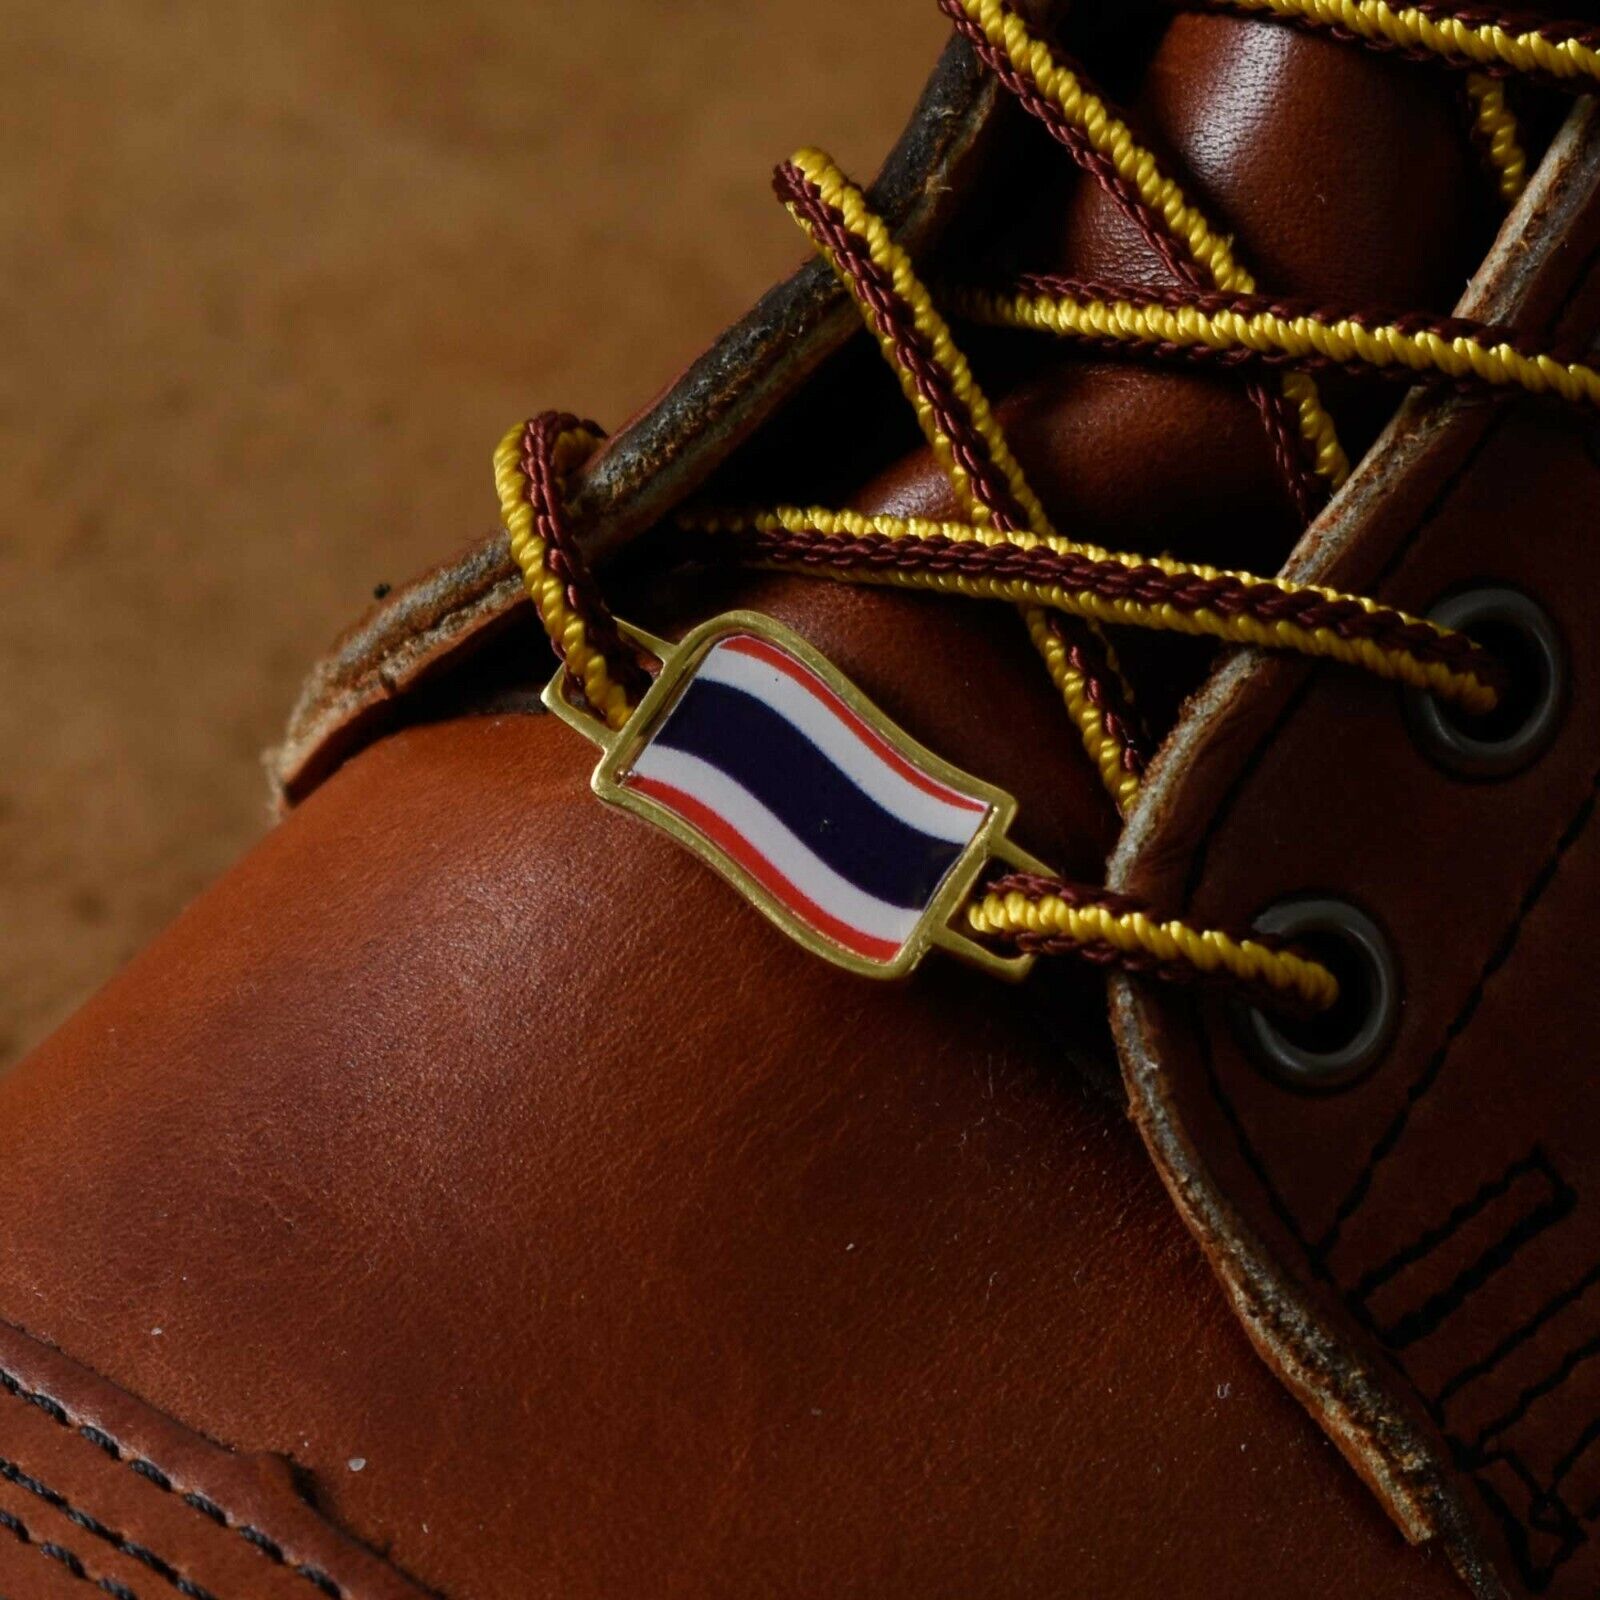 Thailand Flags Shoes Boot Shoelace Keeper Holder Charm BrooklynMaker